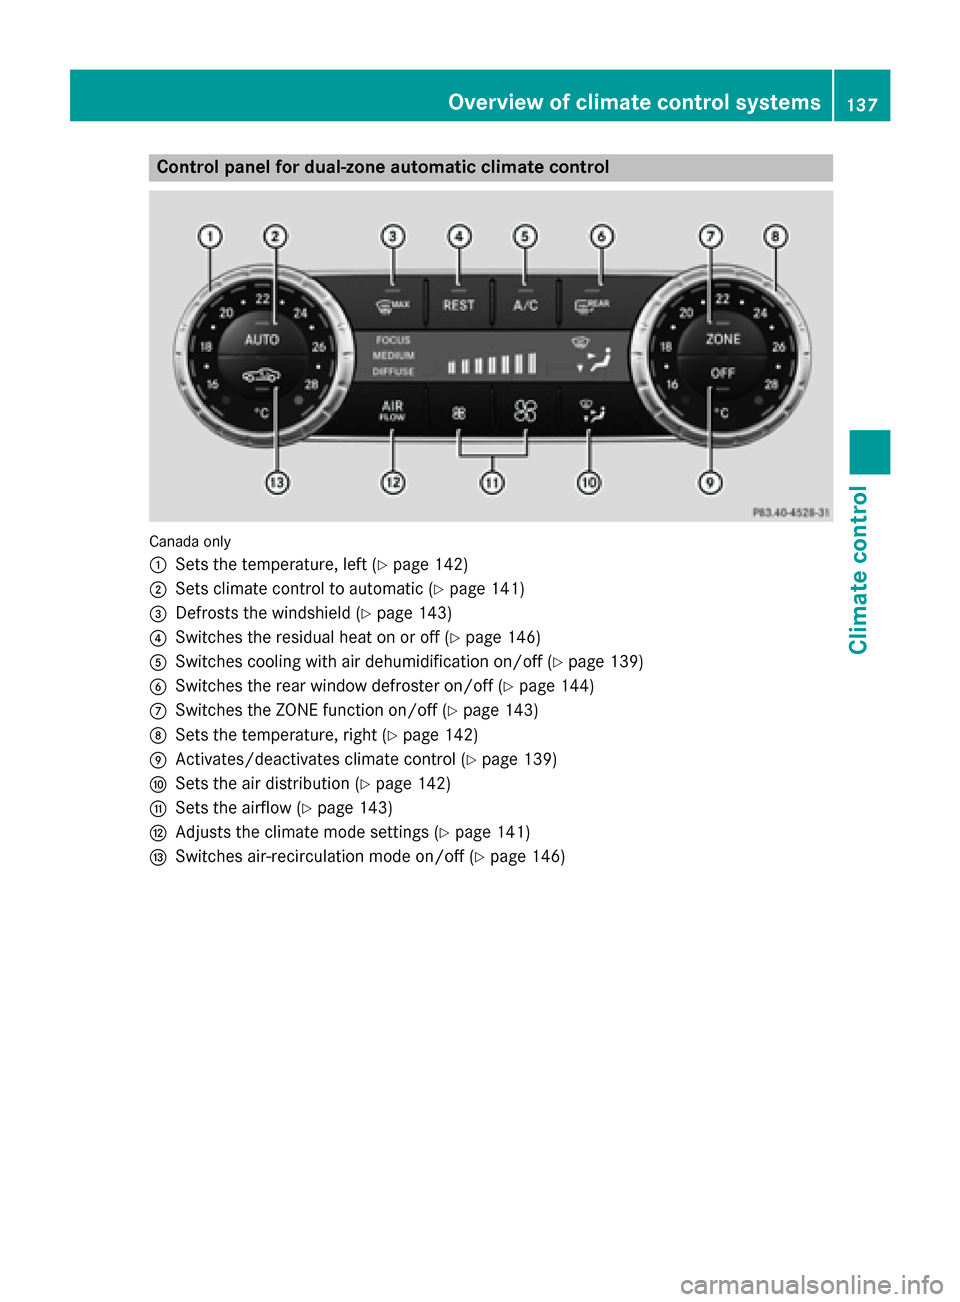 MERCEDES-BENZ SL-Class 2016 R231 Owners Manual Control panel for dual-zone automatic climate control
Canadaonly
:
Sets the temperature, left (Ypage 142)
;Sets climate control to automatic (Ypage 141)
=Defrosts the windshield (Ypage 143)
?Switches 